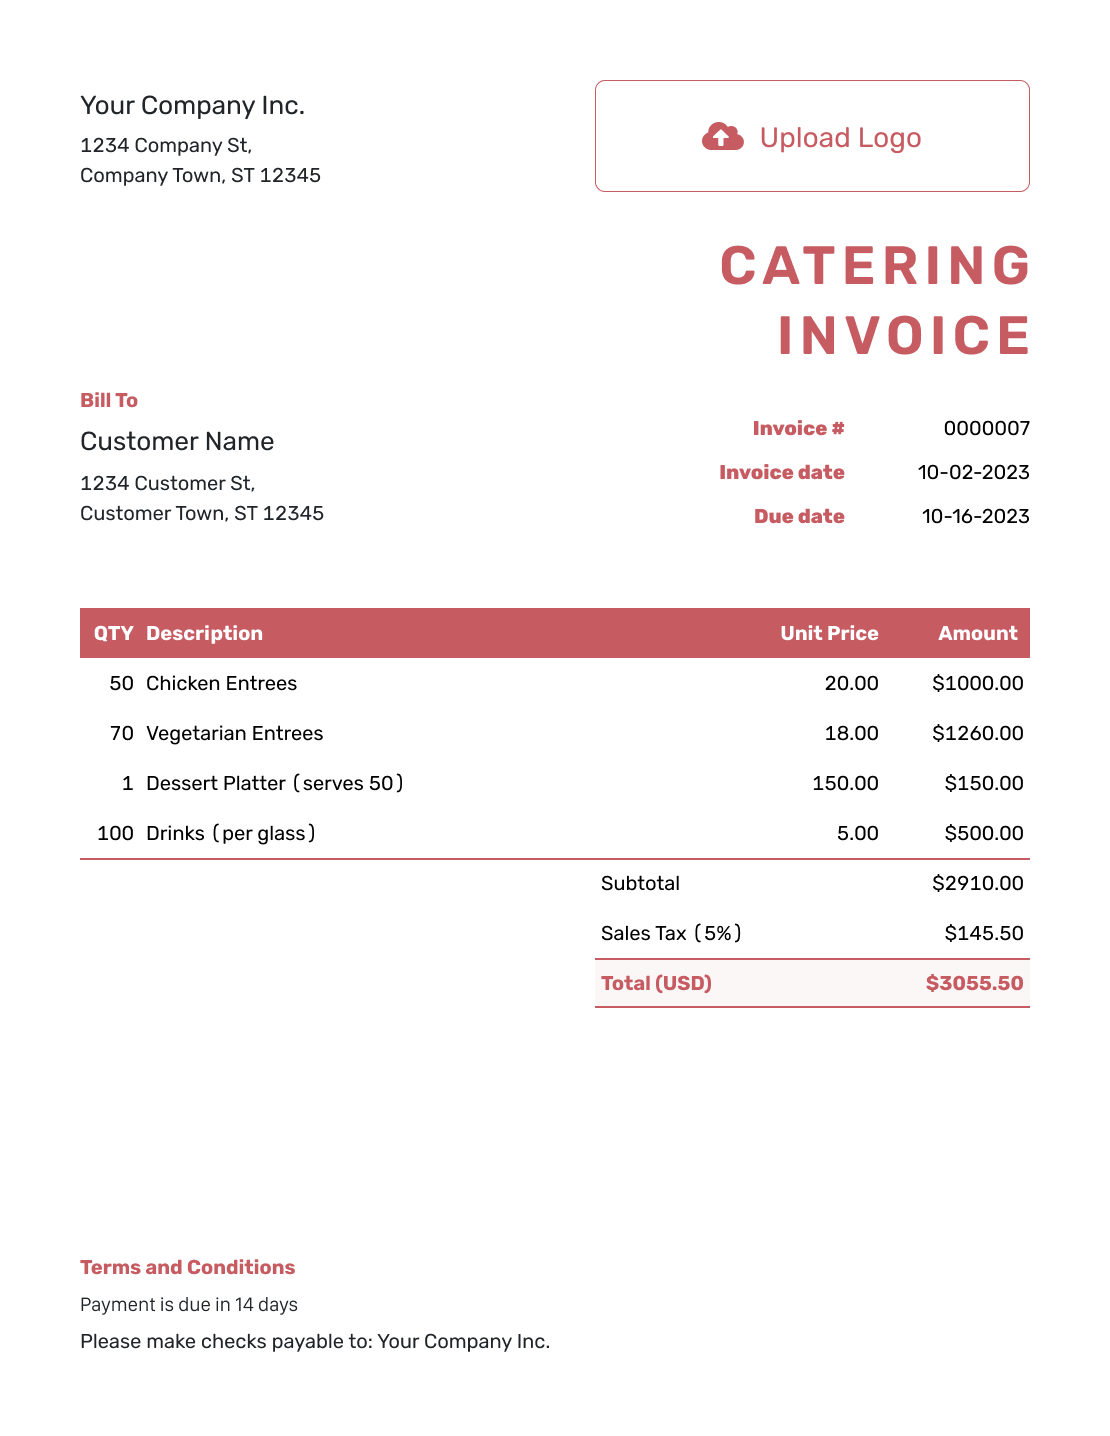 Itemized Catering Invoice Template